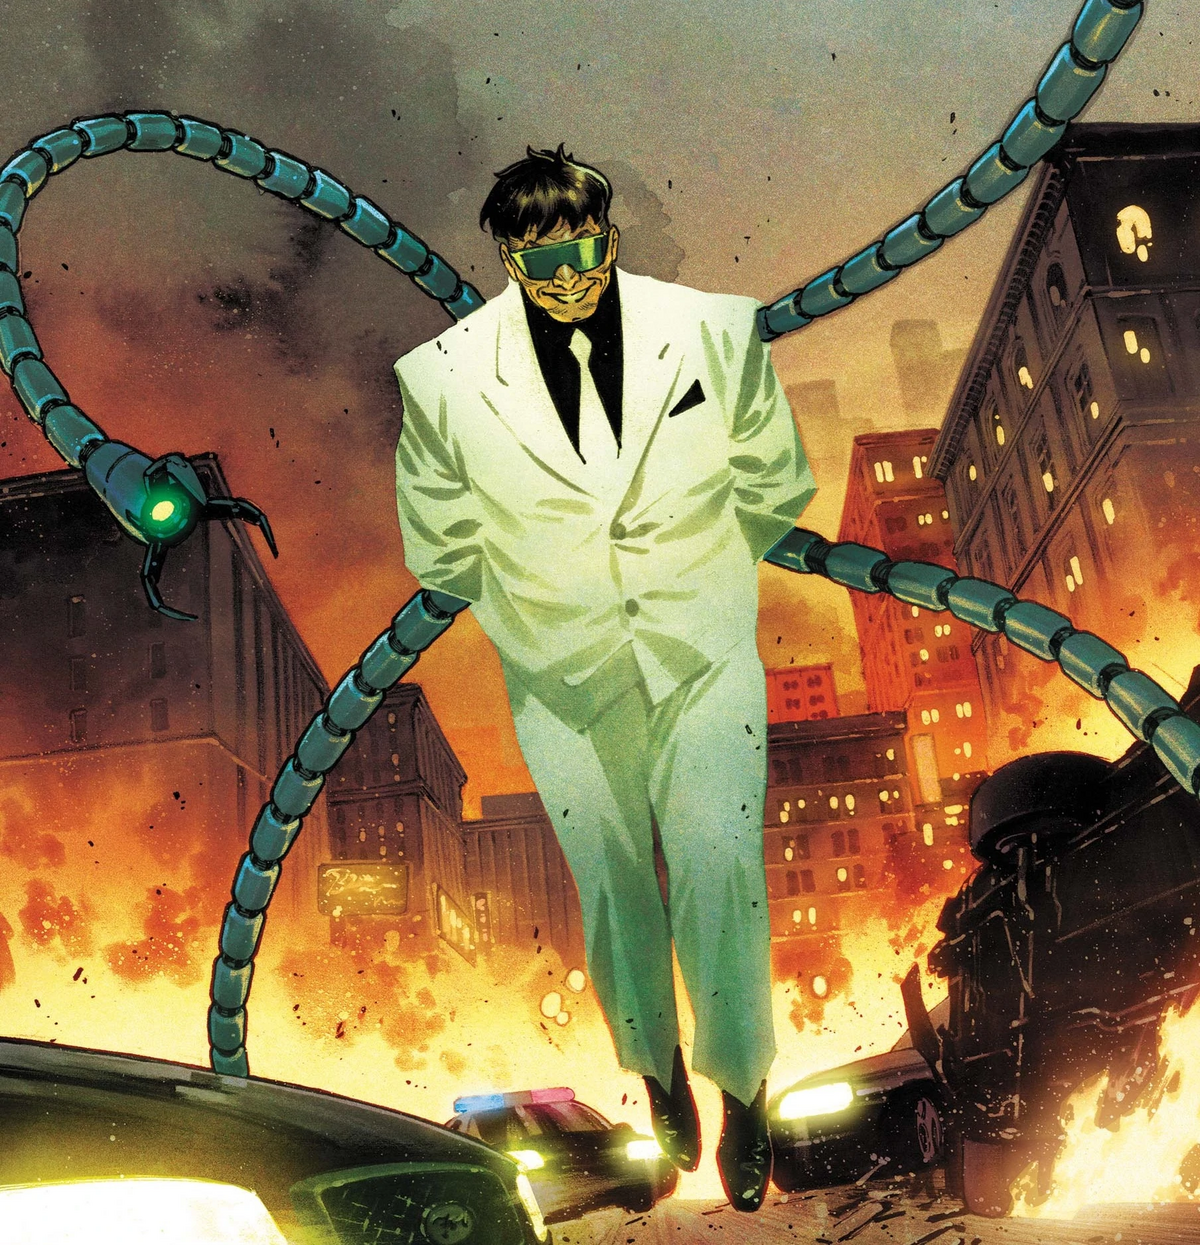 Doctor Octopus just got a weirdly cool power upgrade for his